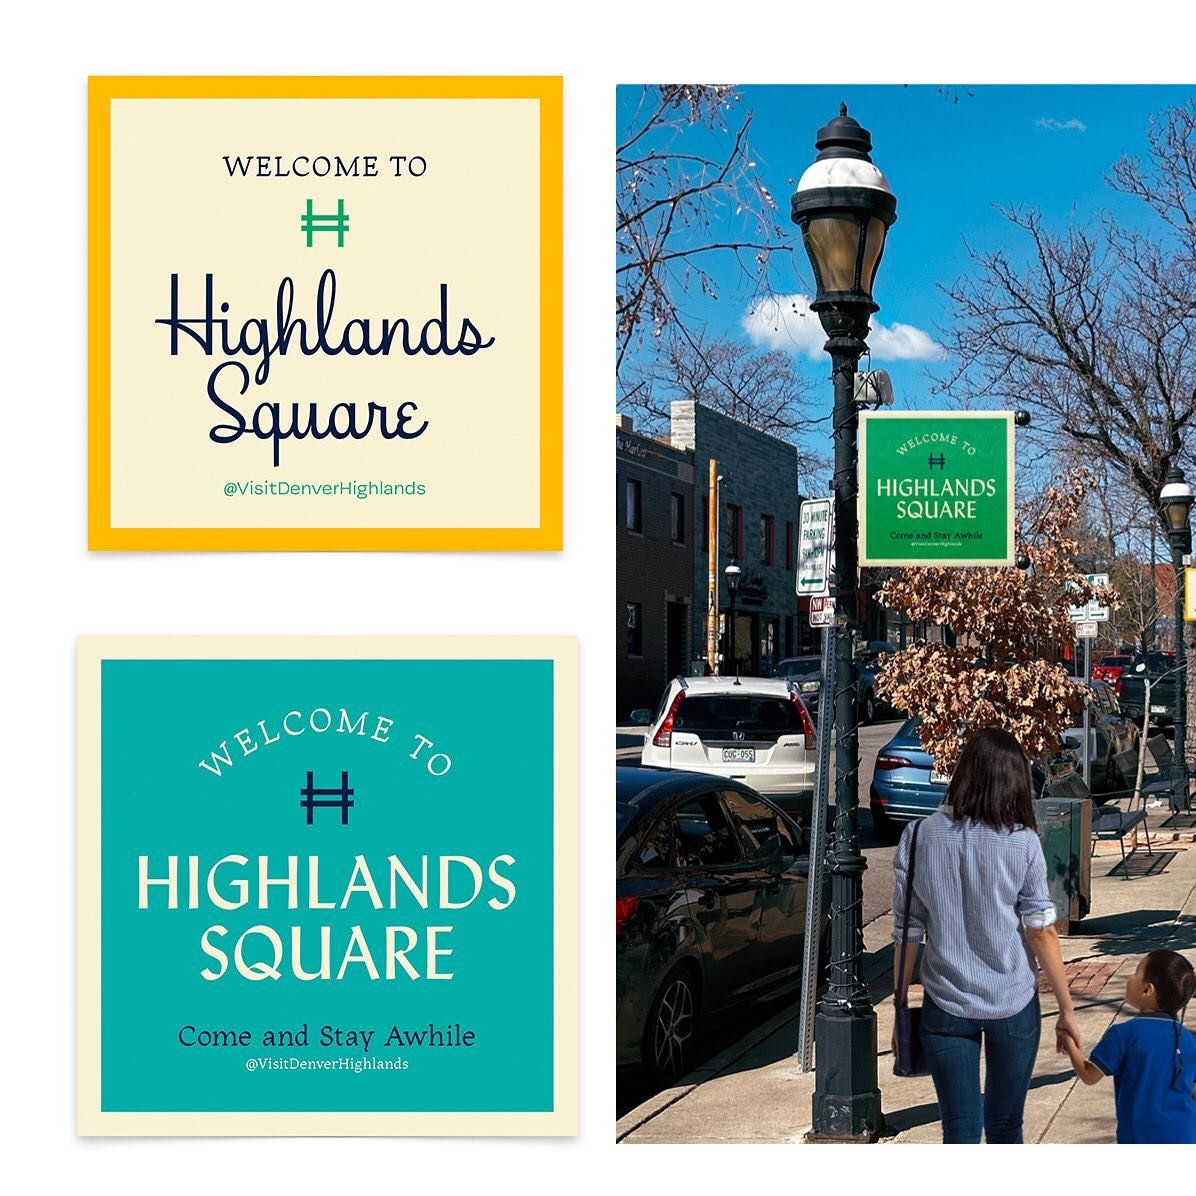 Highlands Square is getting a new look! We love these new designs from the team at @the.made.shop, but can&rsquo;t decide which is best! So, we thought we&rsquo;d ask our neighbors - which one do you think best represents our neighborhood?

Pick your